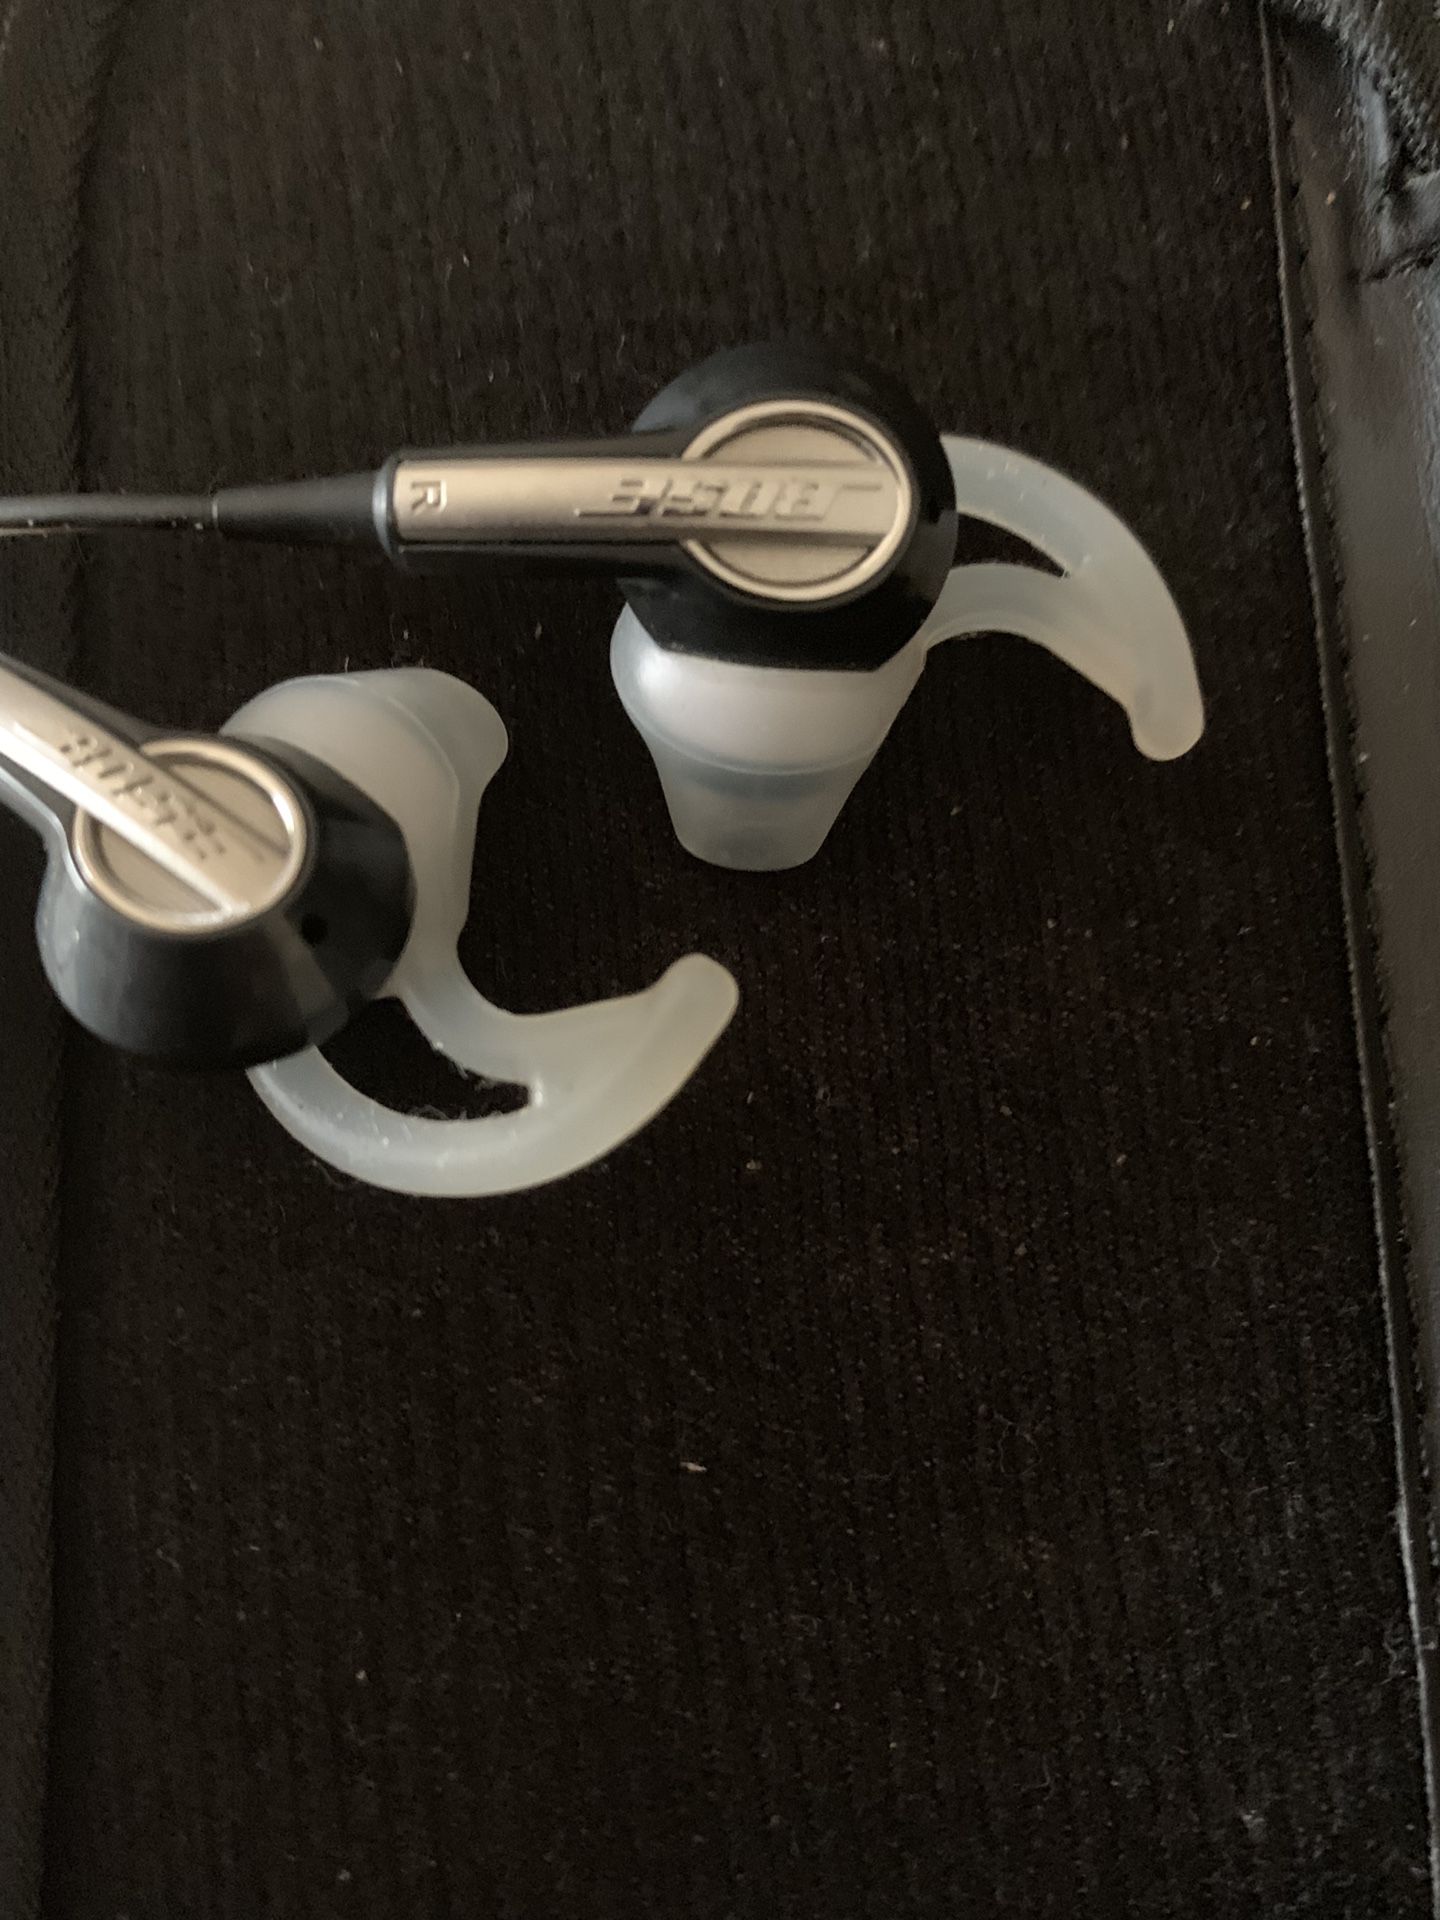 Bose wired earbuds and case